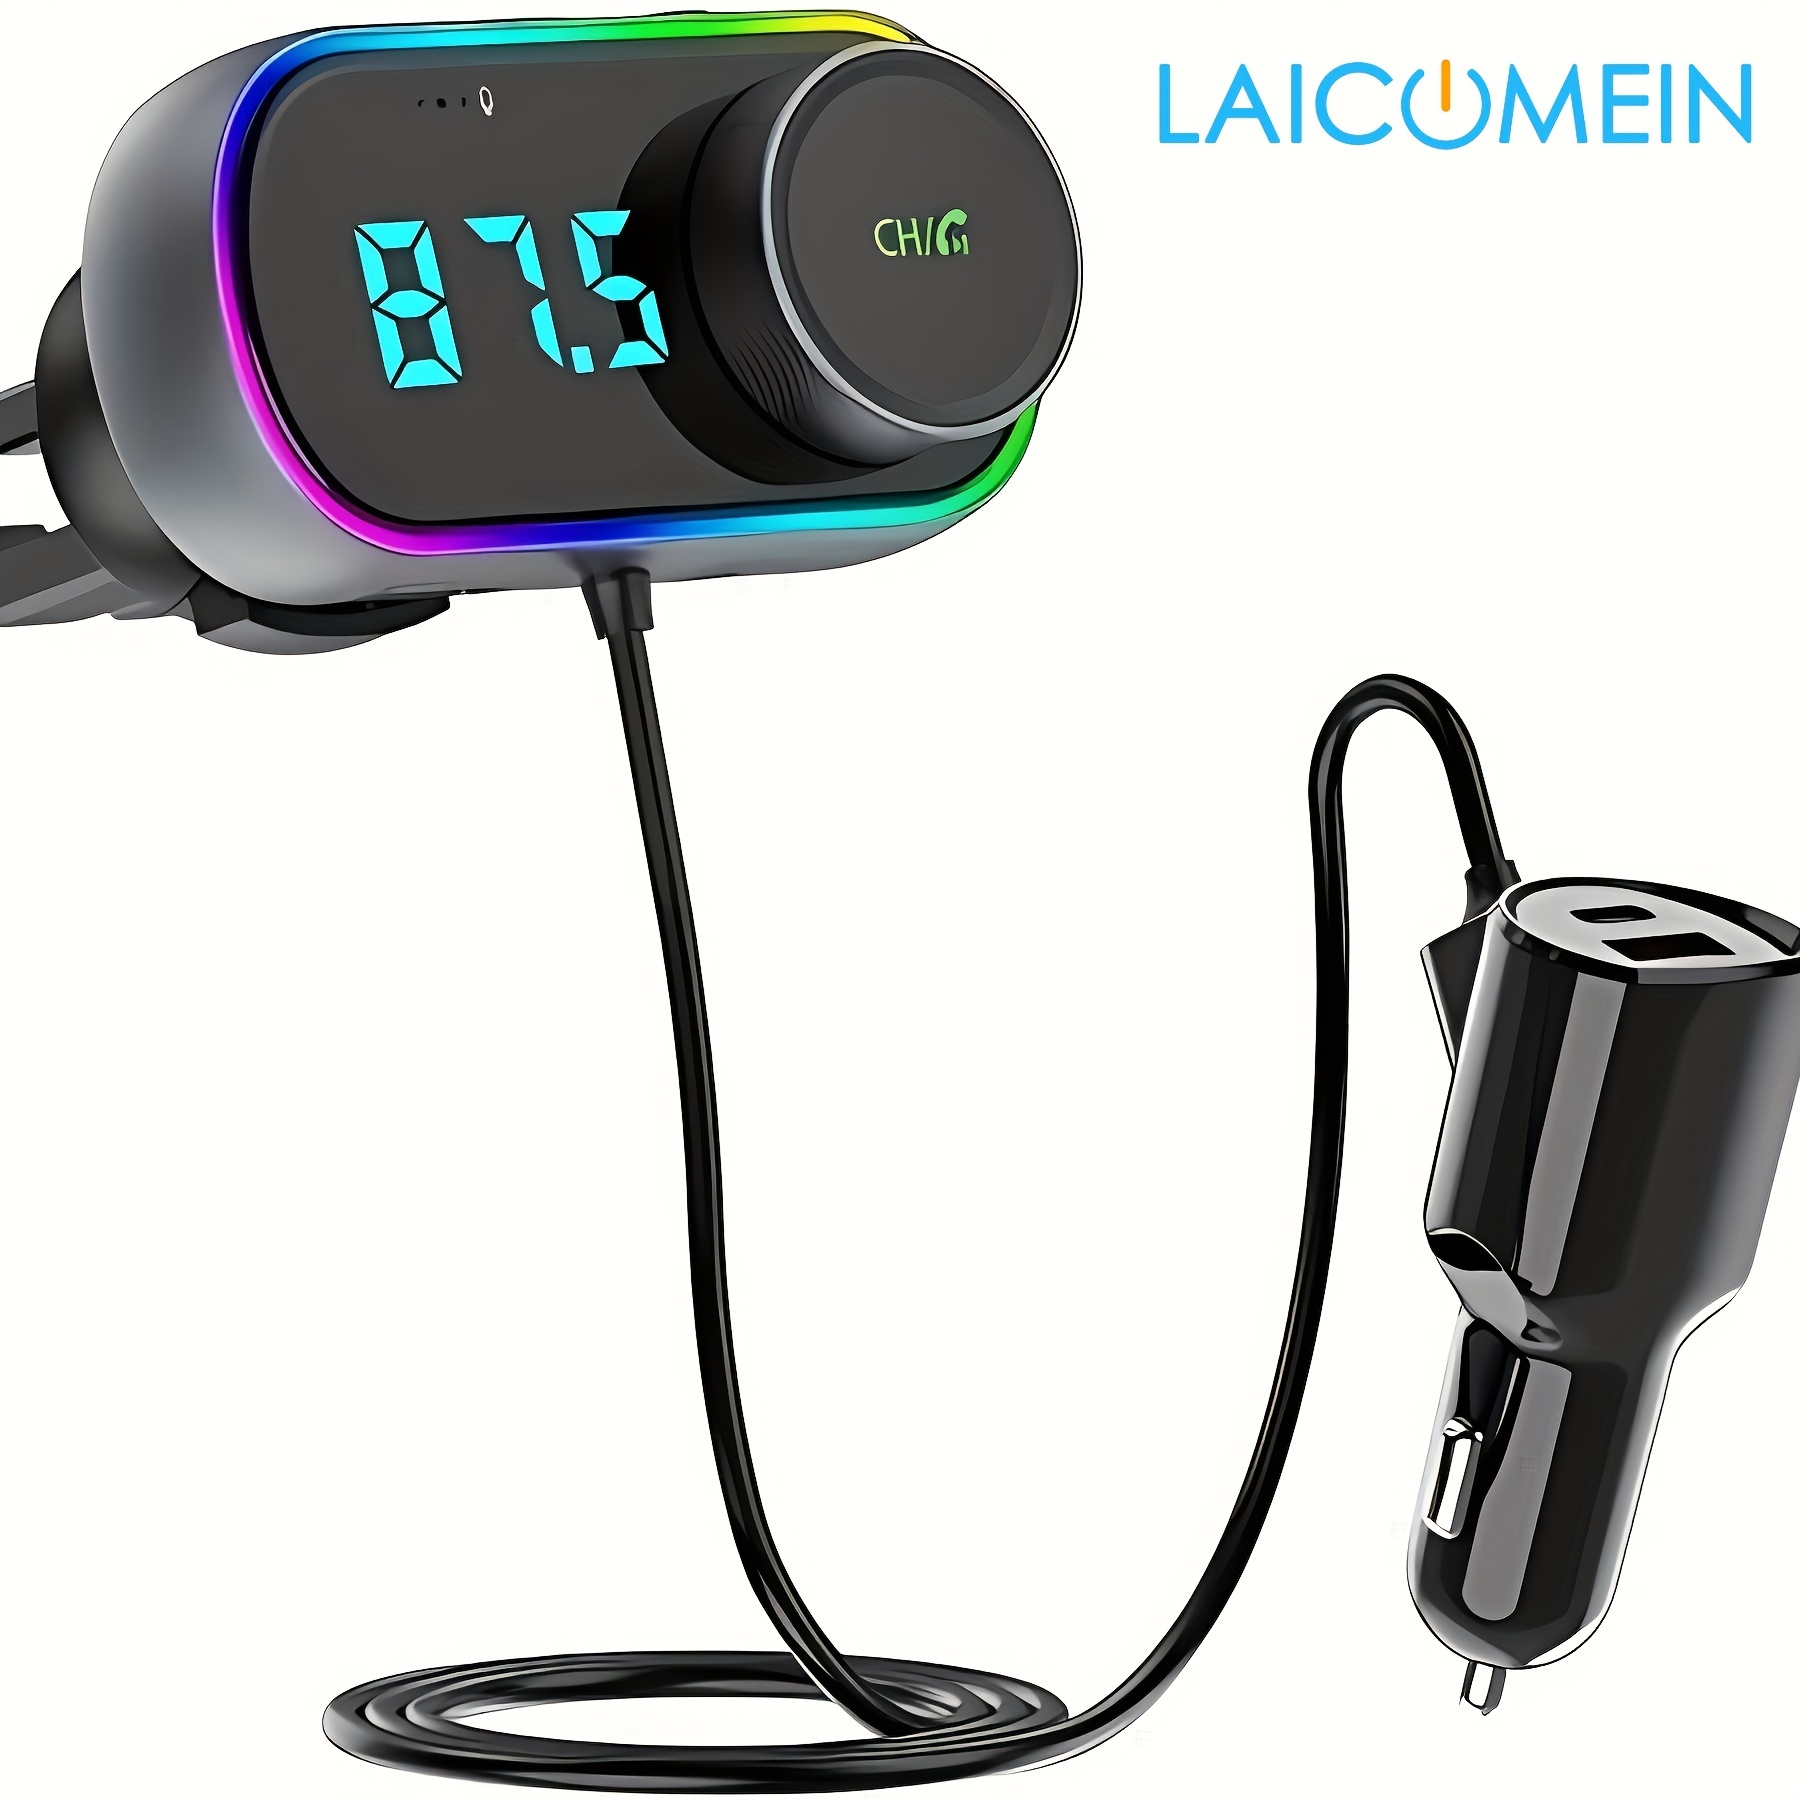  Bluetooth FM Transmitter for Car Wireless Radio Adapter Kit,  Hands-Free Calling Dual Microphone, Car USB Charger QC 3.0 & PD 20 W for  All Smartphones Audio Players, Supports TF/SD Card and